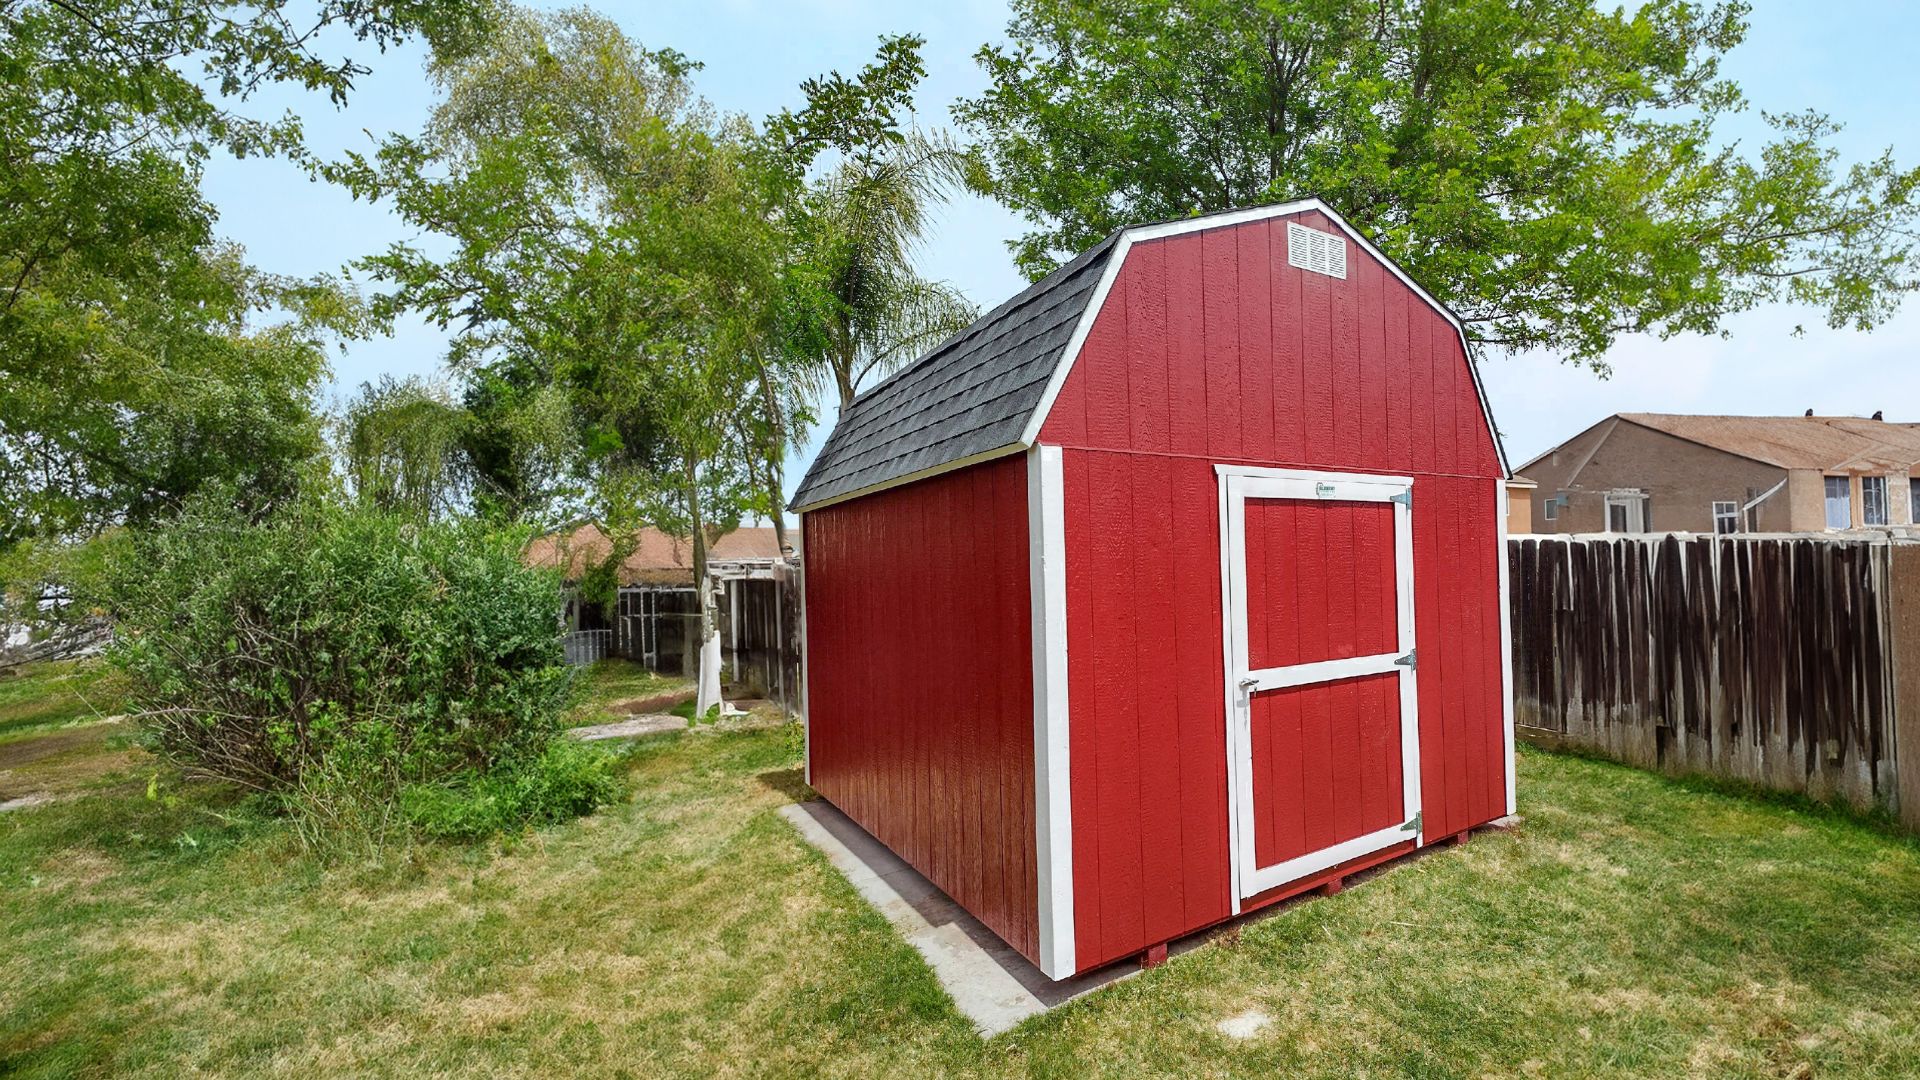 Red Stor-Max shed in backyard